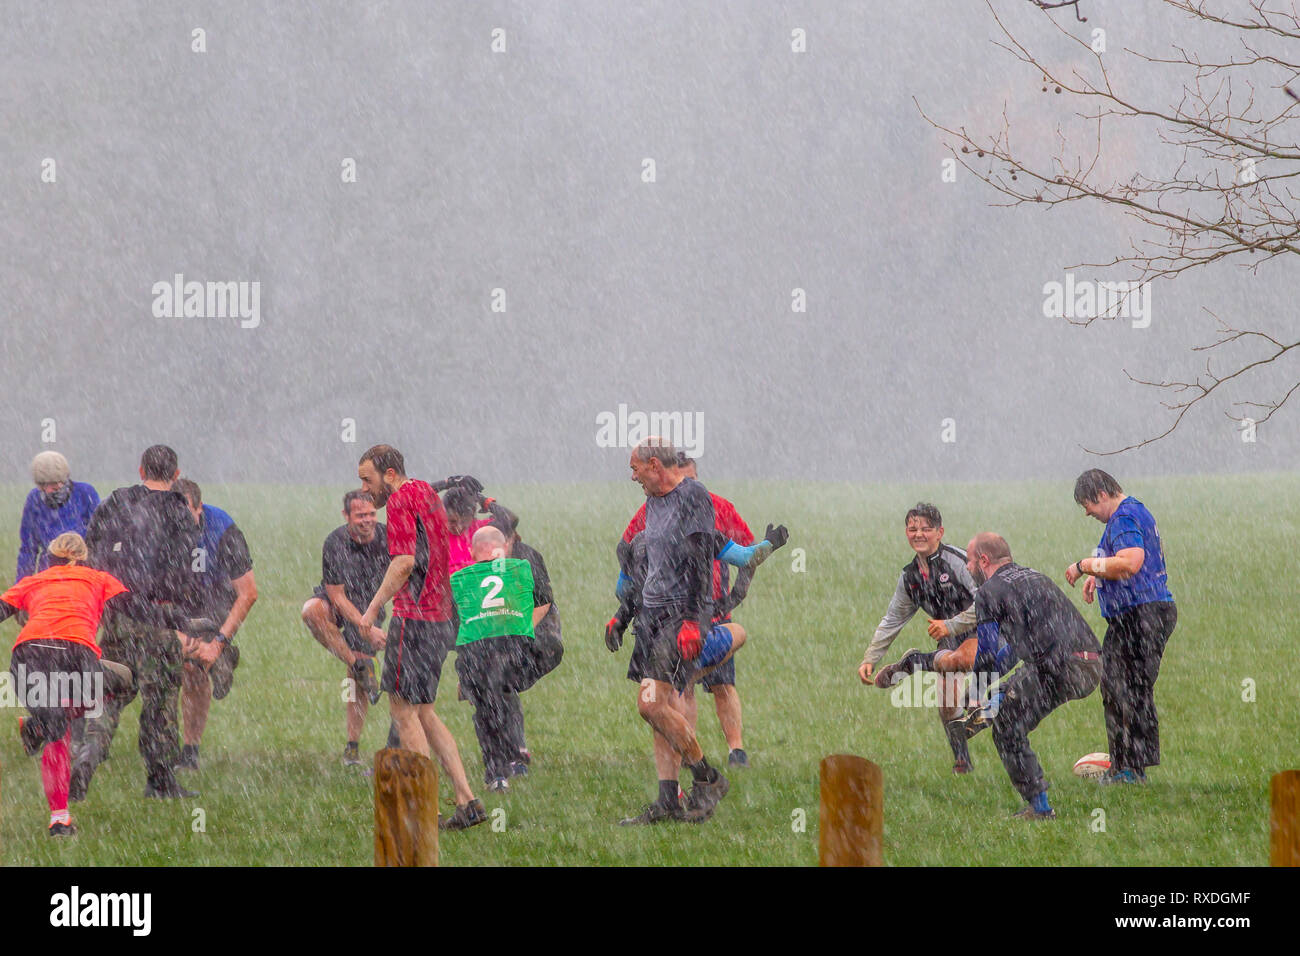 Northampton, UK. 8th March 2019. After a sunny start to the day, heavy rain came in midmorning soaking the people doing their keep fit classes in Abington Park. Credit: Keith J Smith./Alamy Live News Stock Photo